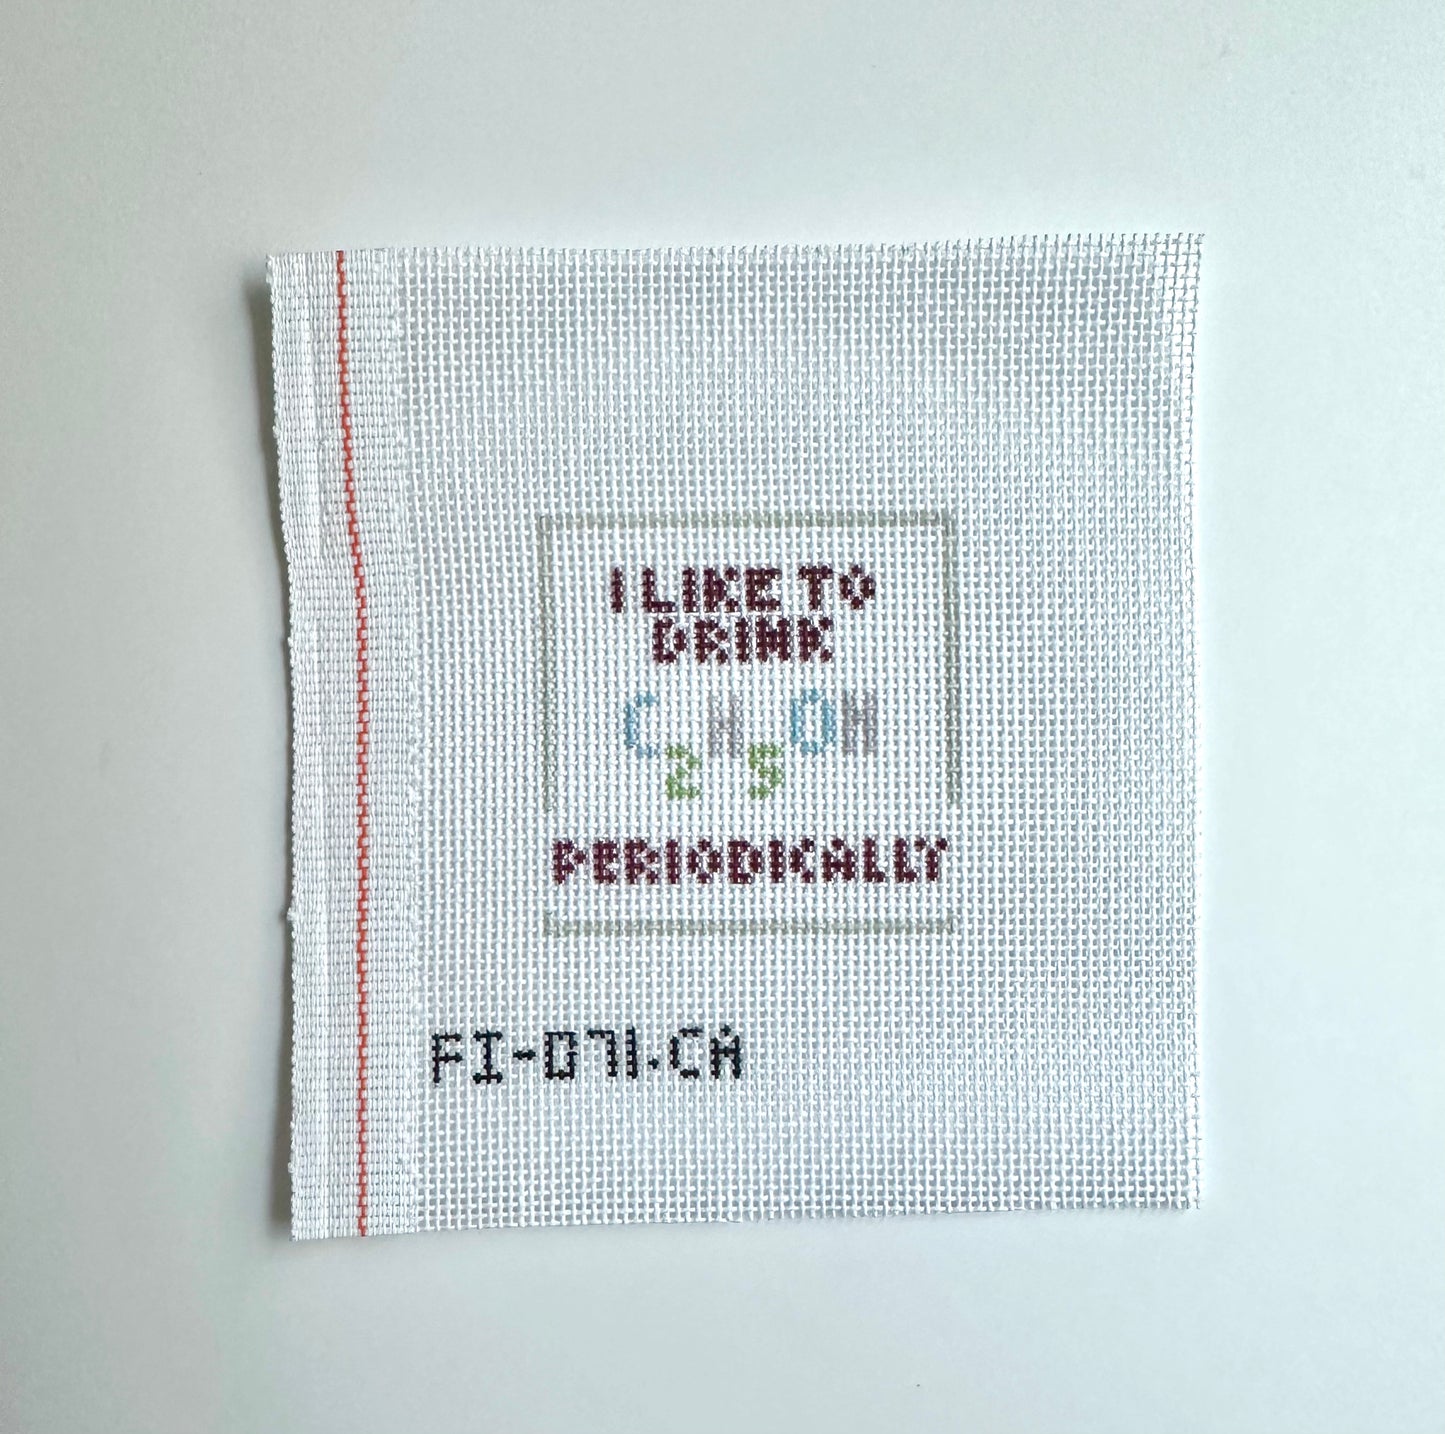 Drink Periodically